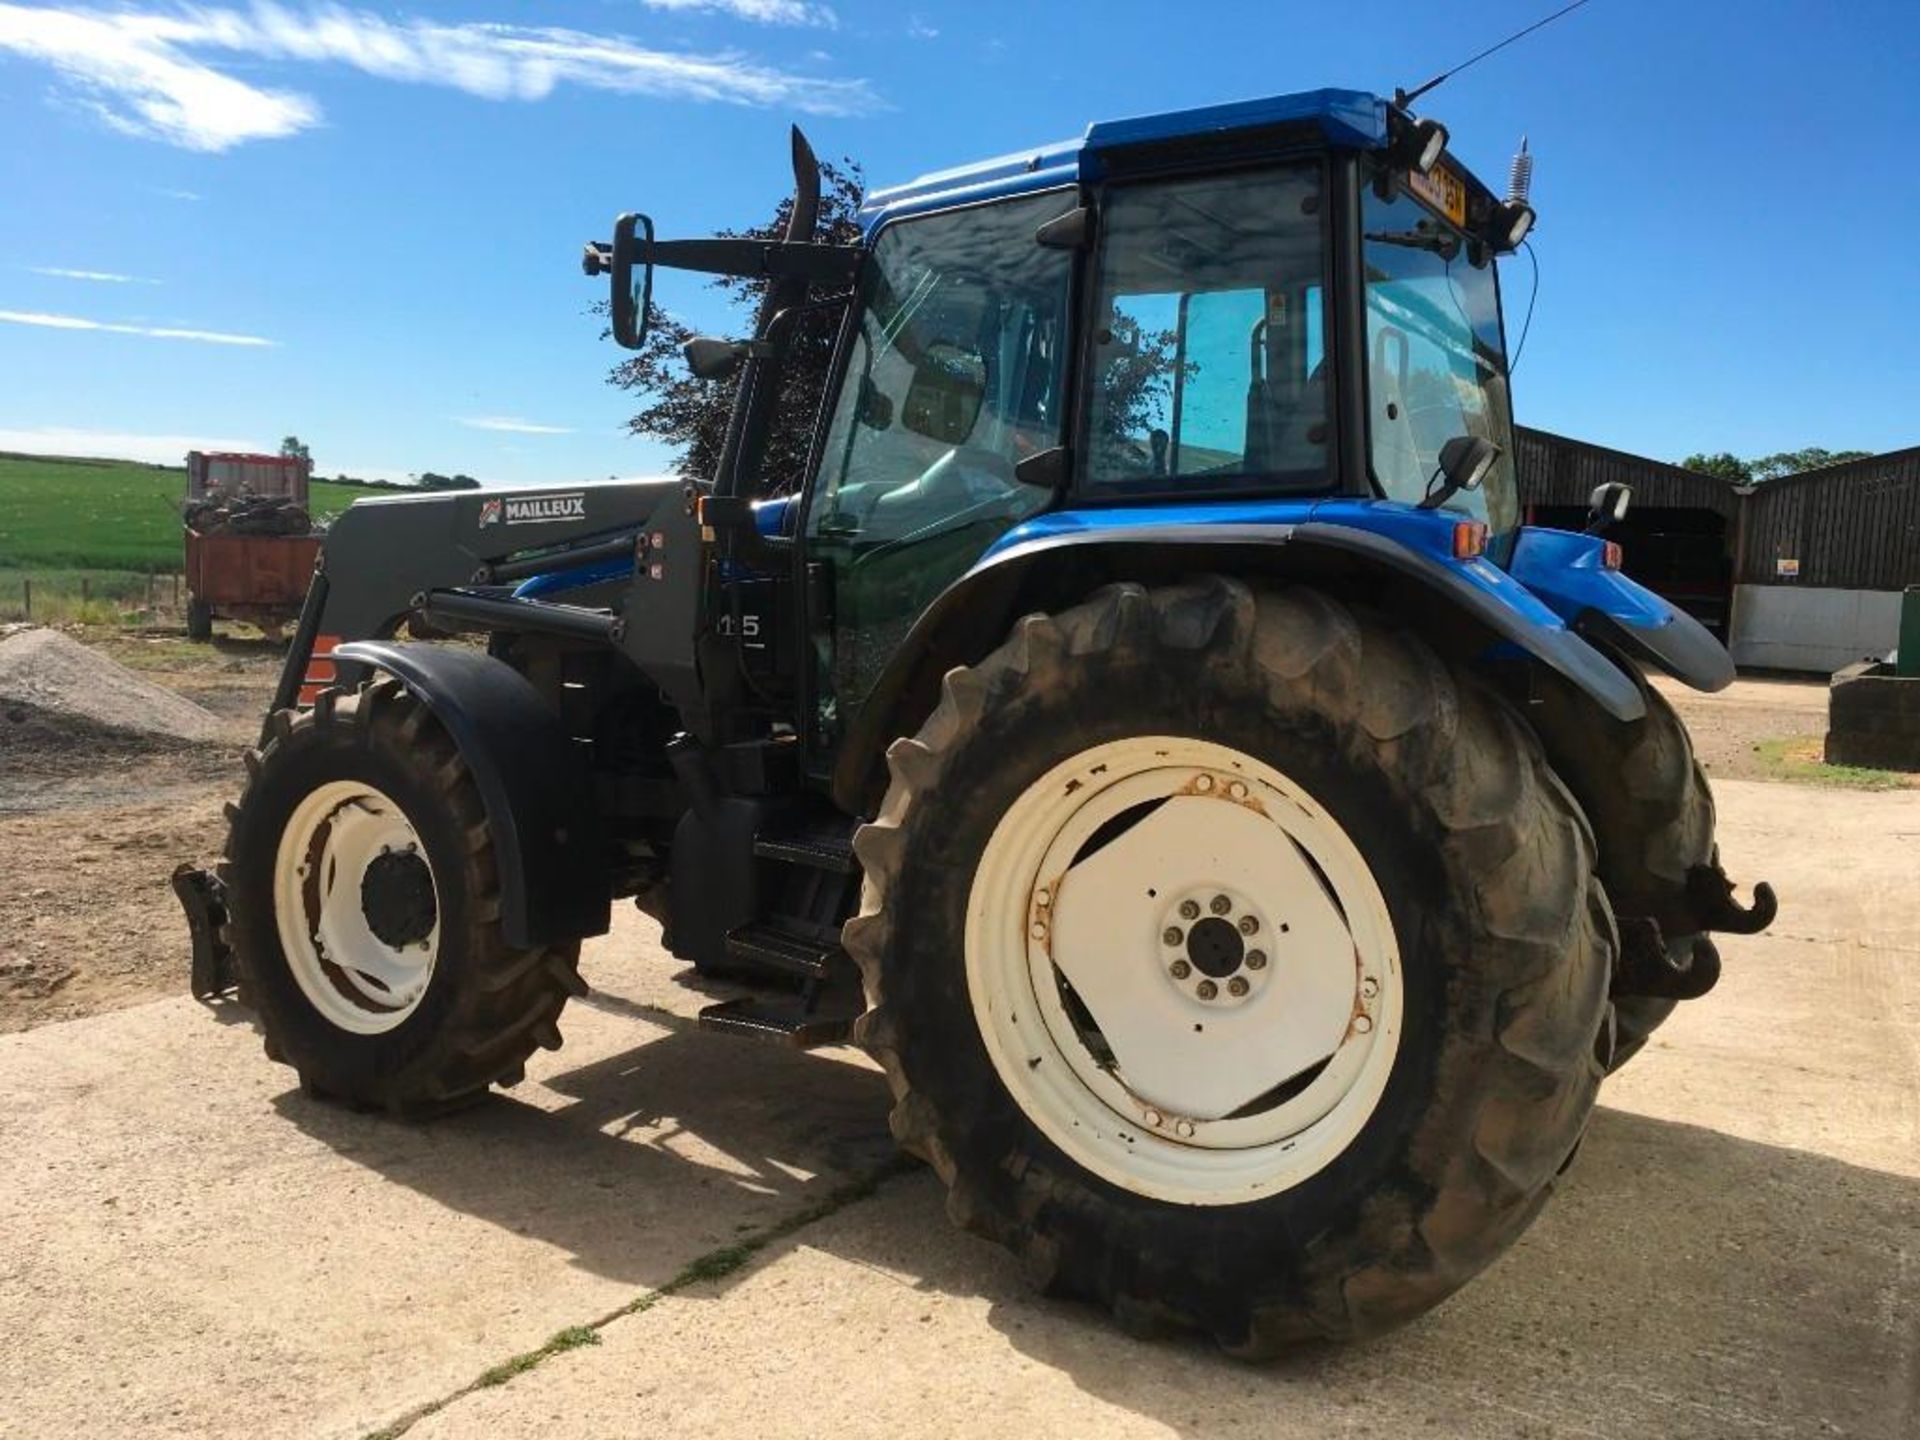 2003 New Holland TS115 tractor with Mailleux MX120 front loader. 2 spool valves, rear link arms and - Image 8 of 13